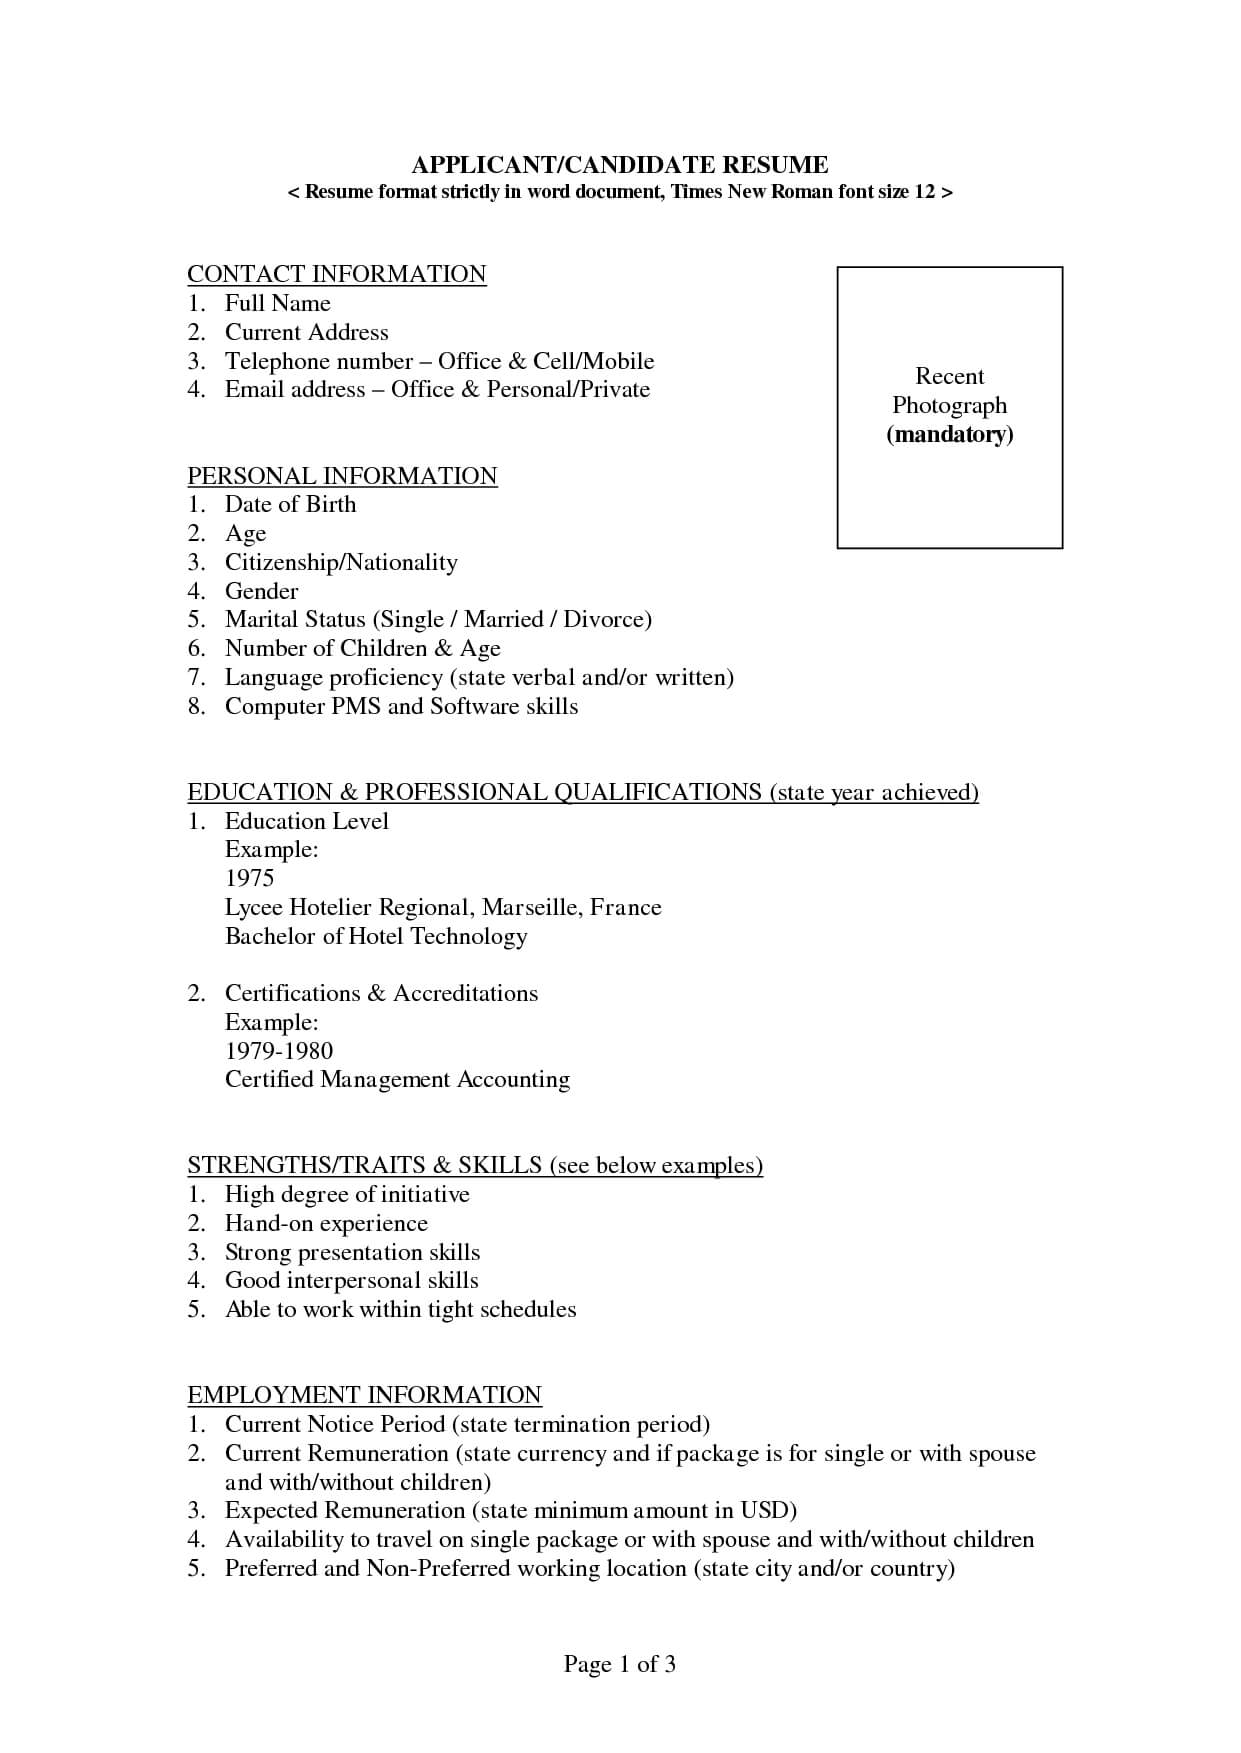 Resume Format Download In Ms Word Microsoft Word Resume For Simple Resume Template Microsoft Word